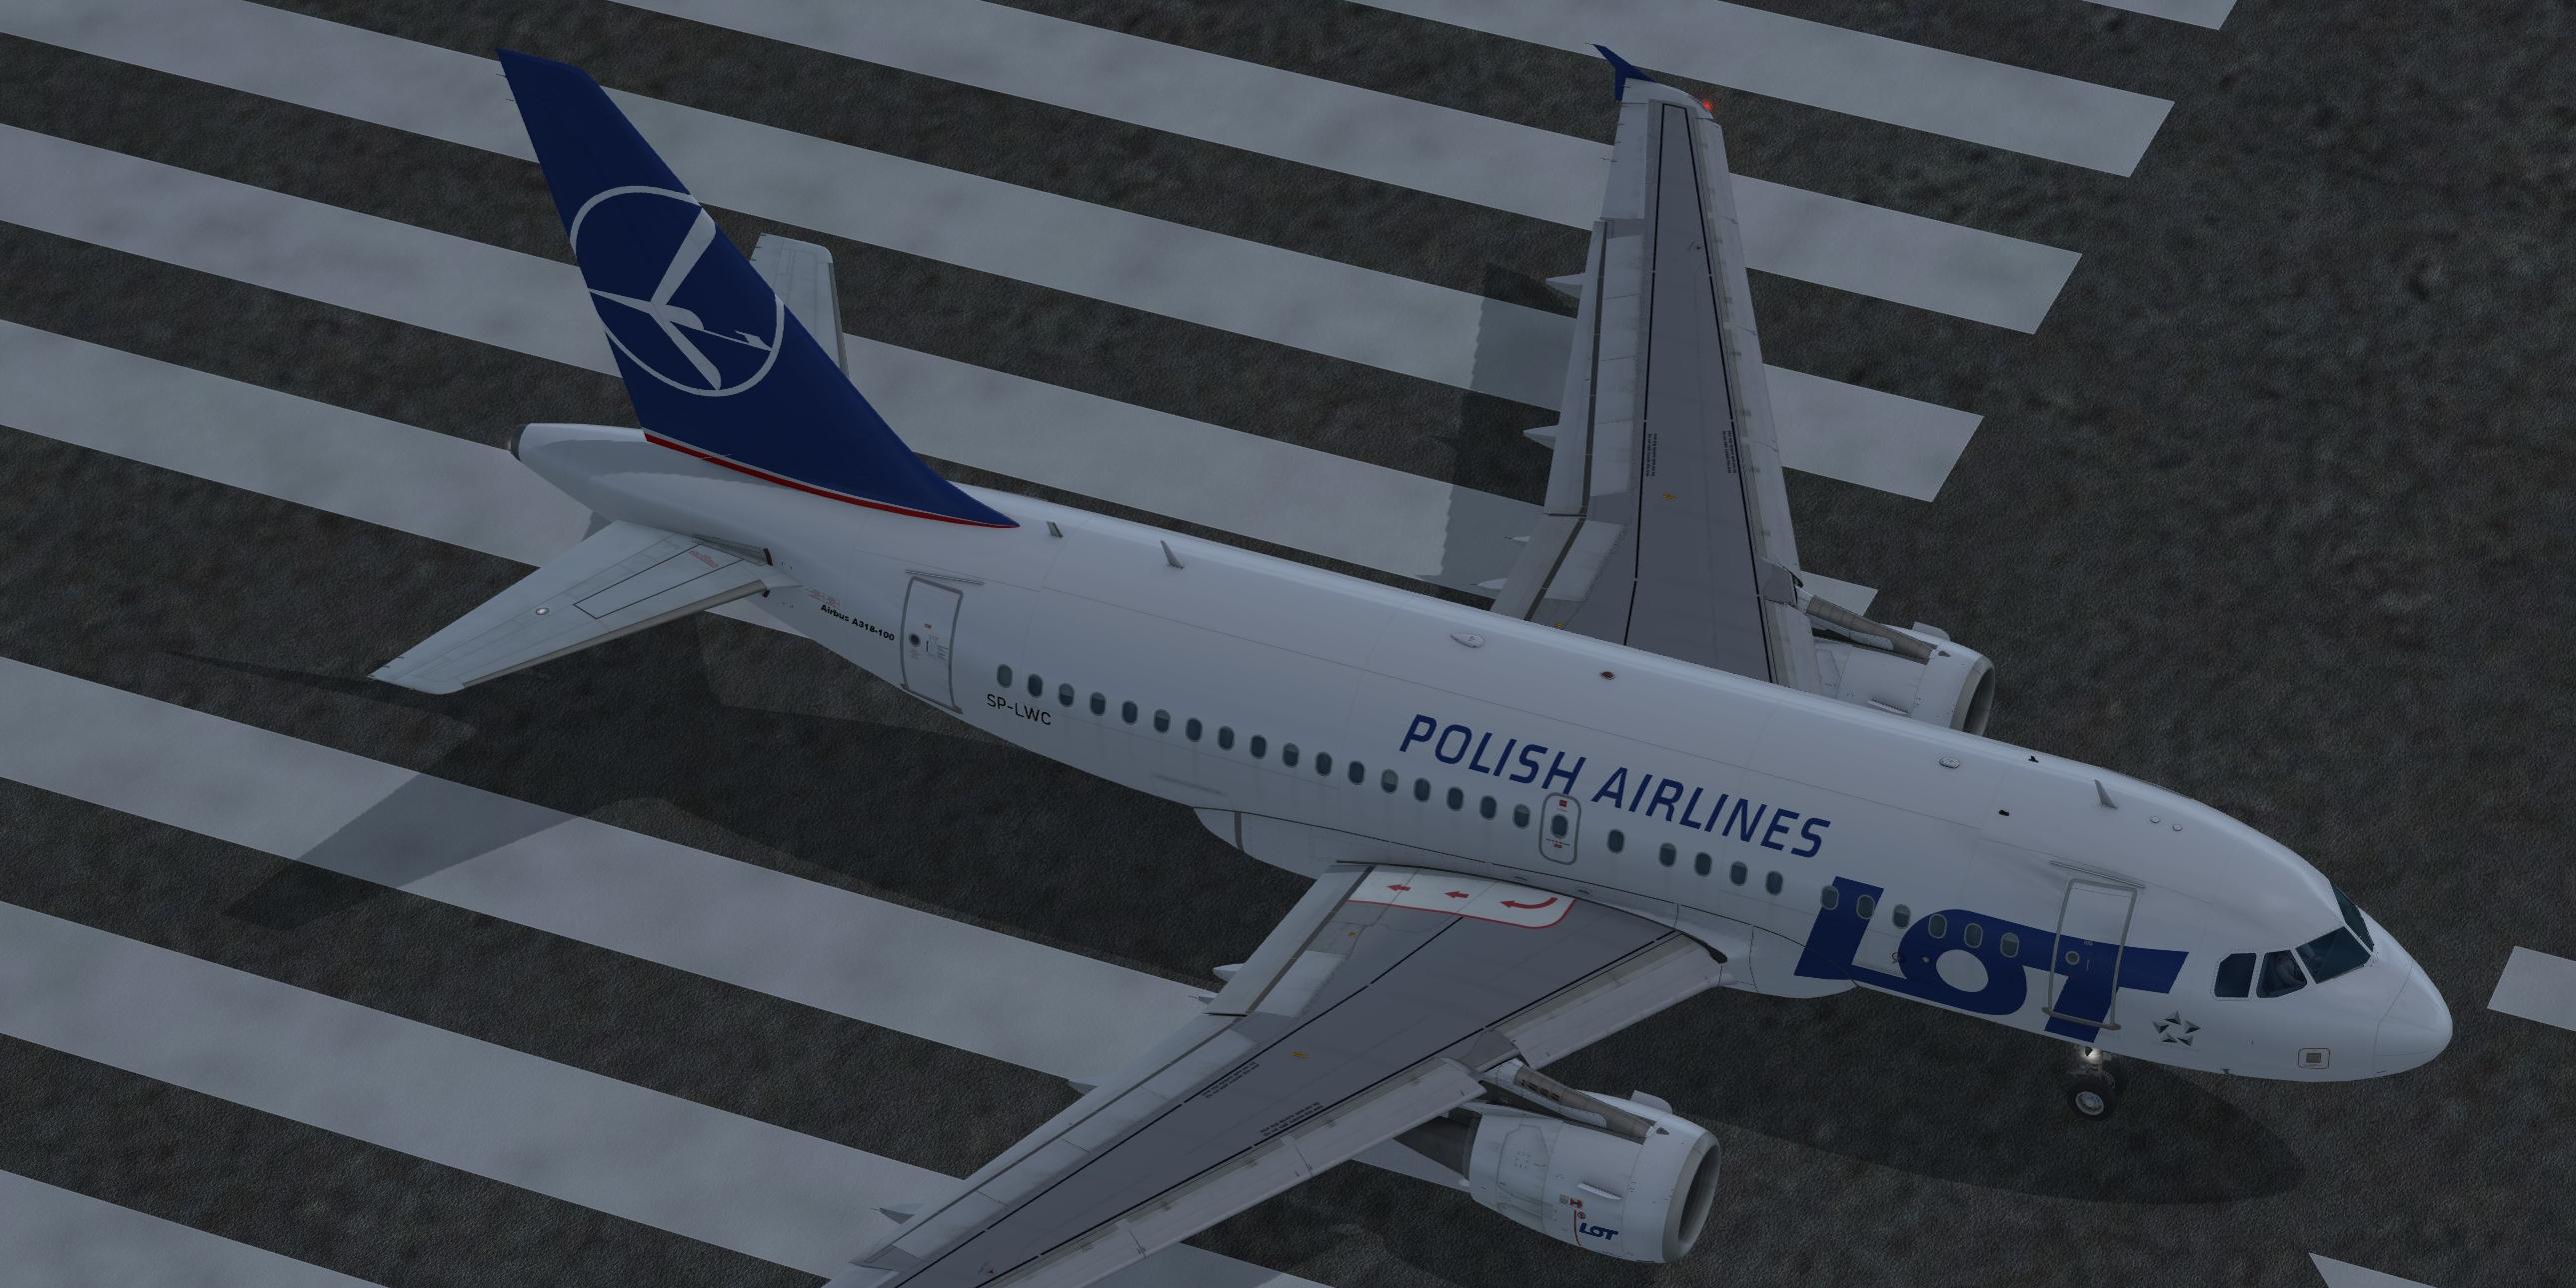 LOT Polish Airlines (fictional) Airbus A318-111 CFM